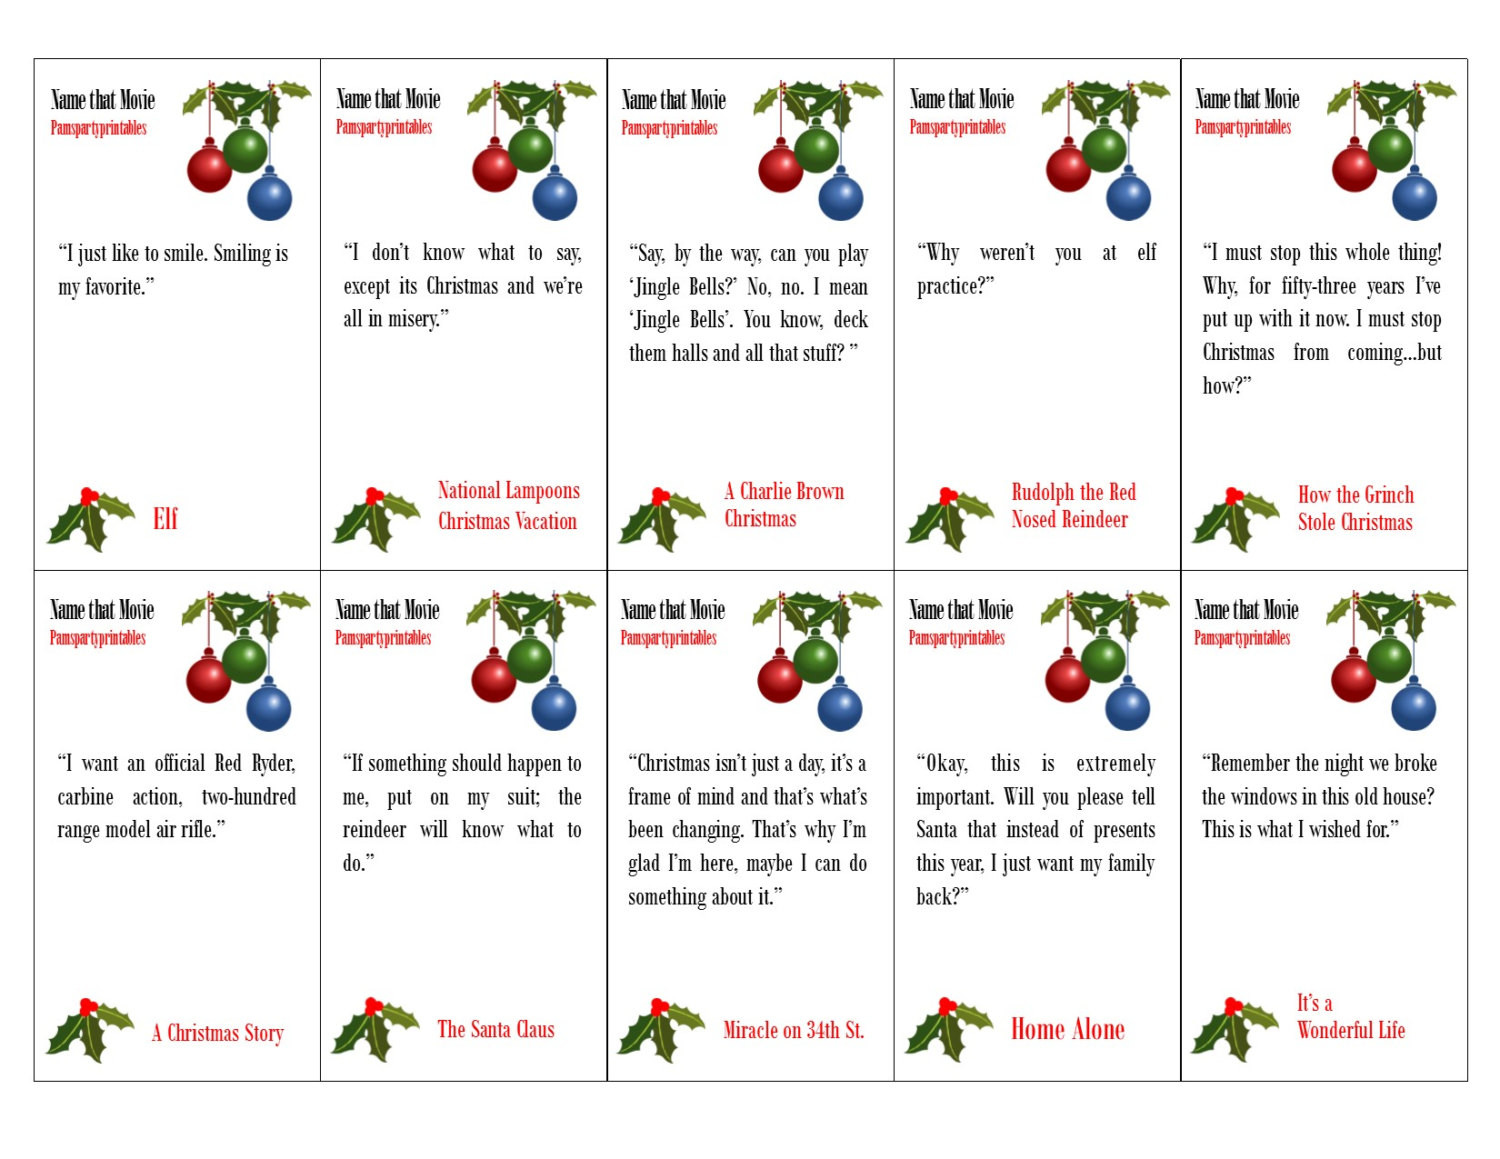 Christmas Movie Quote Game
 Name that Christmas Movie Christmas Movie Quote Game